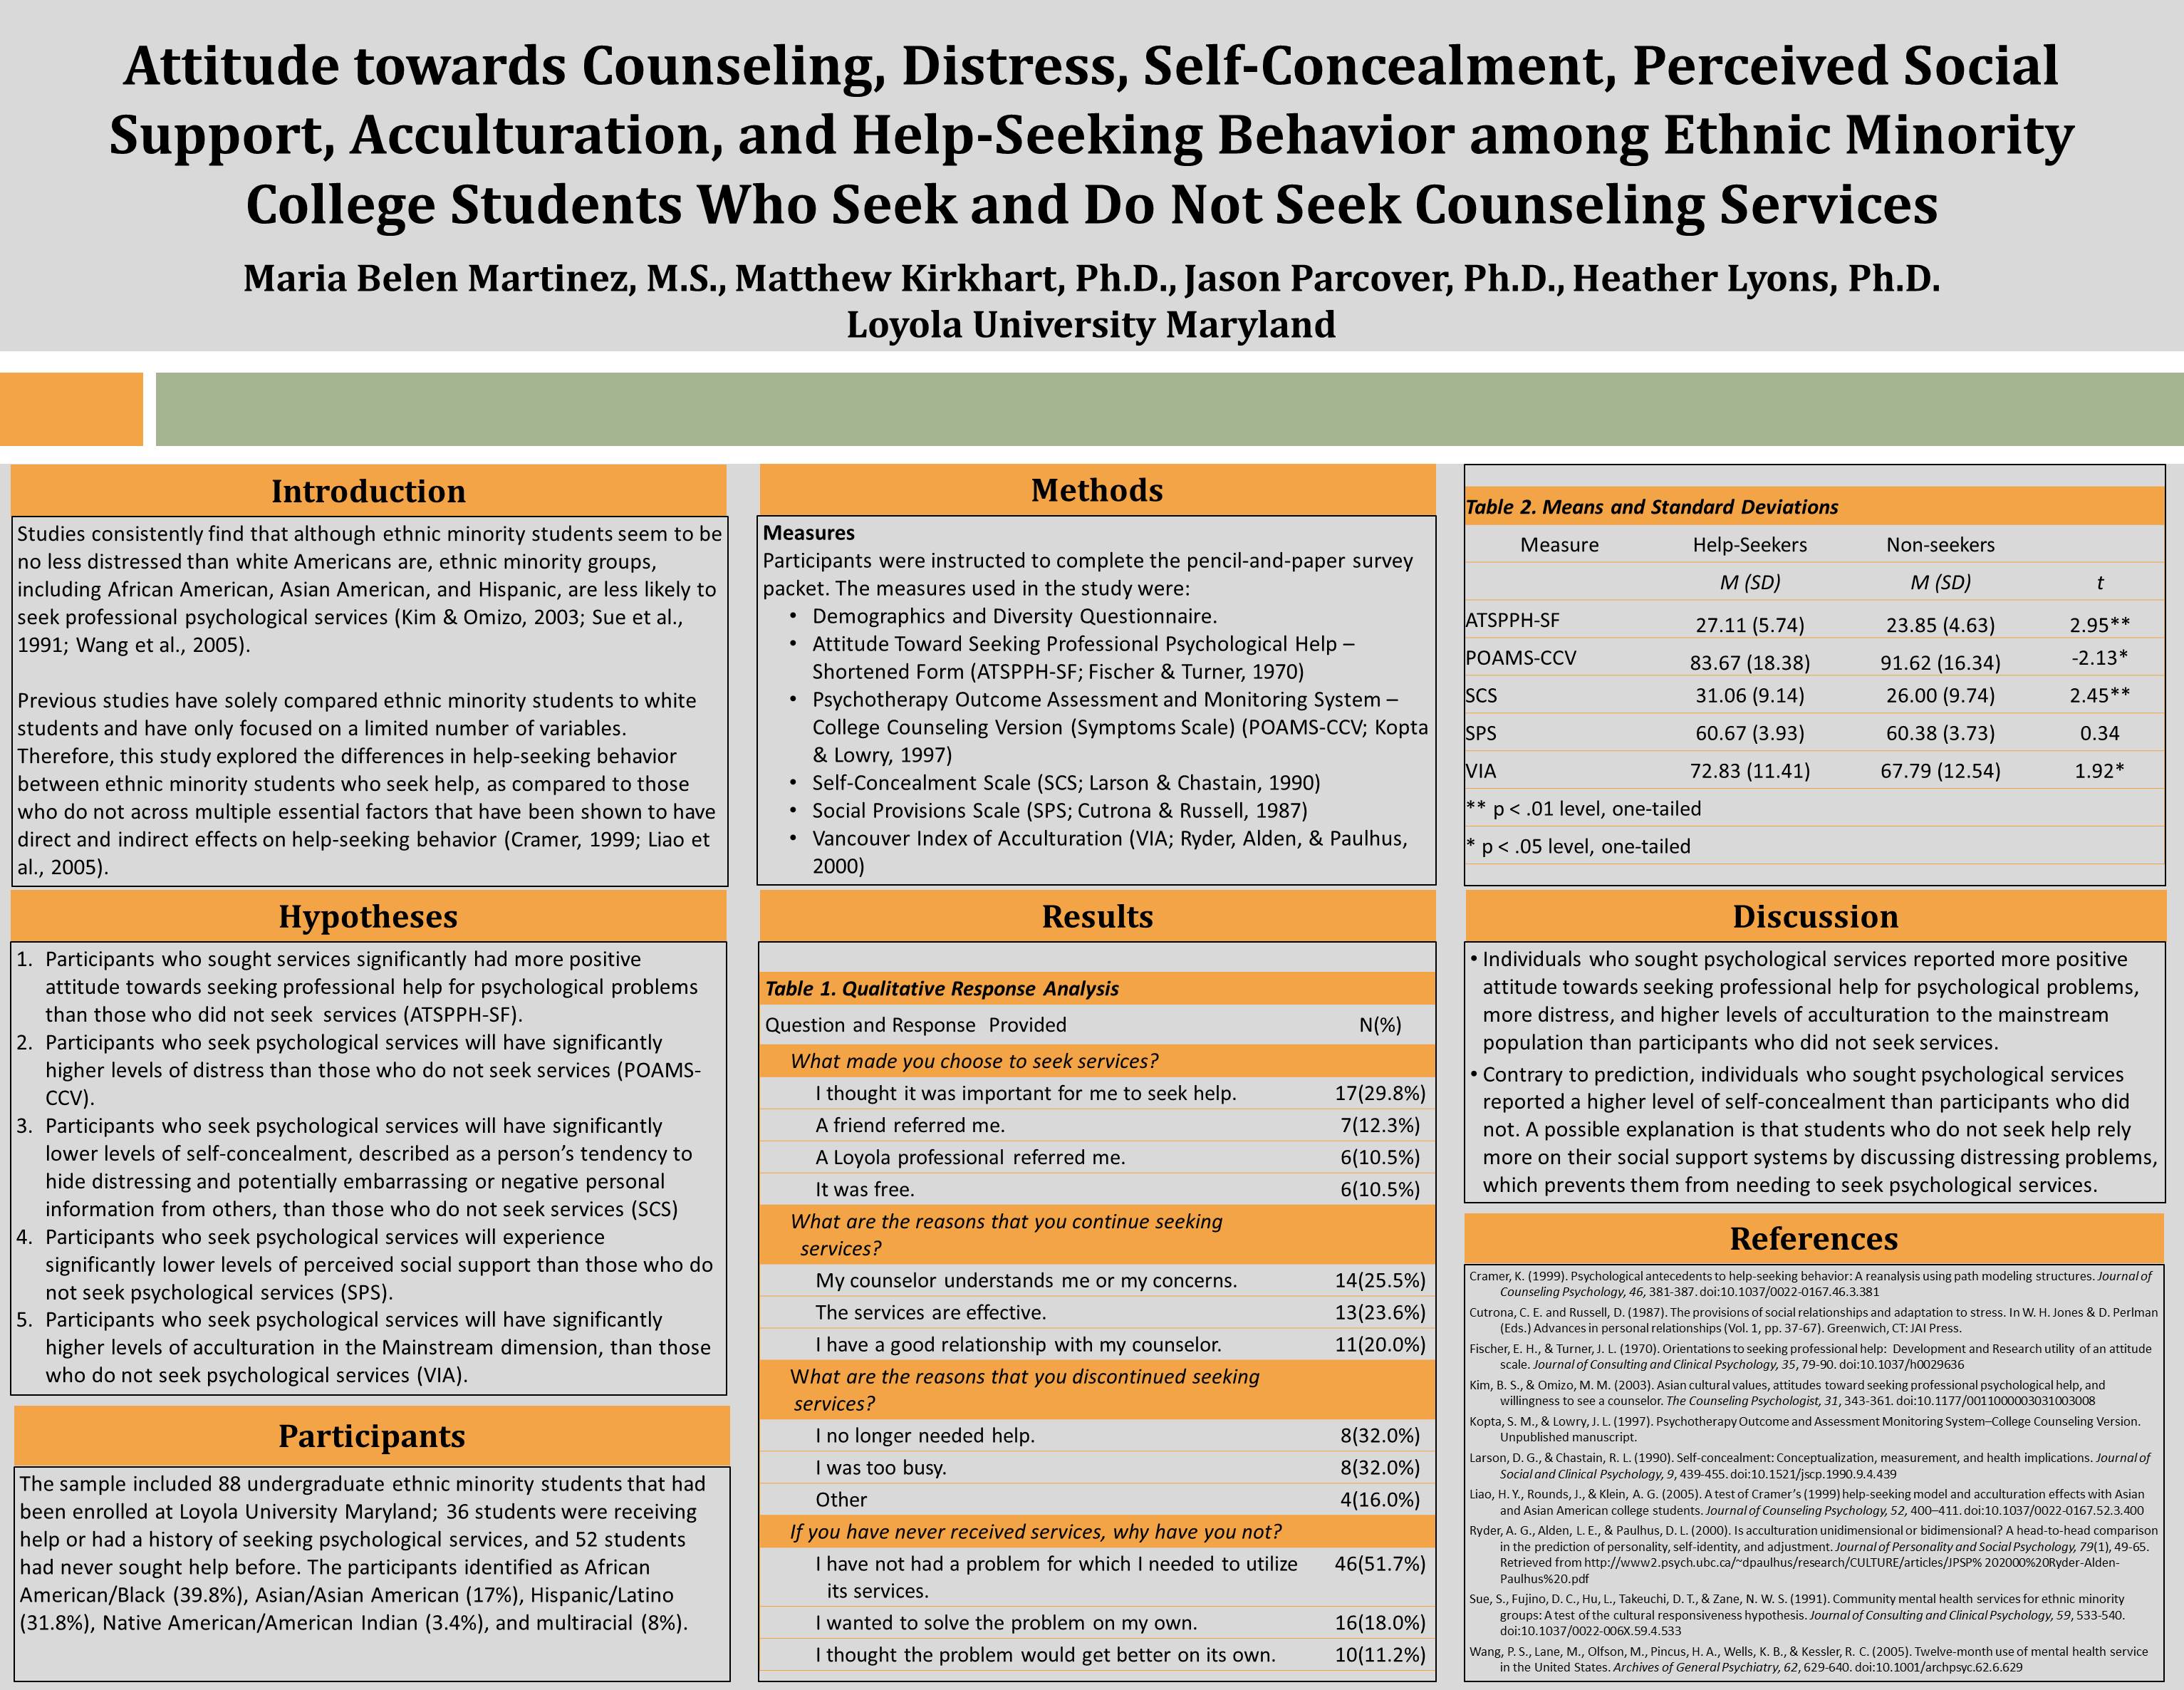 Enlarged poster image: Attitude towards Counseling, Distress, Self-Concealment, Perceived Social Support, Acculturation, and Help-Seeking Behavior among Ethnic Minority College Students